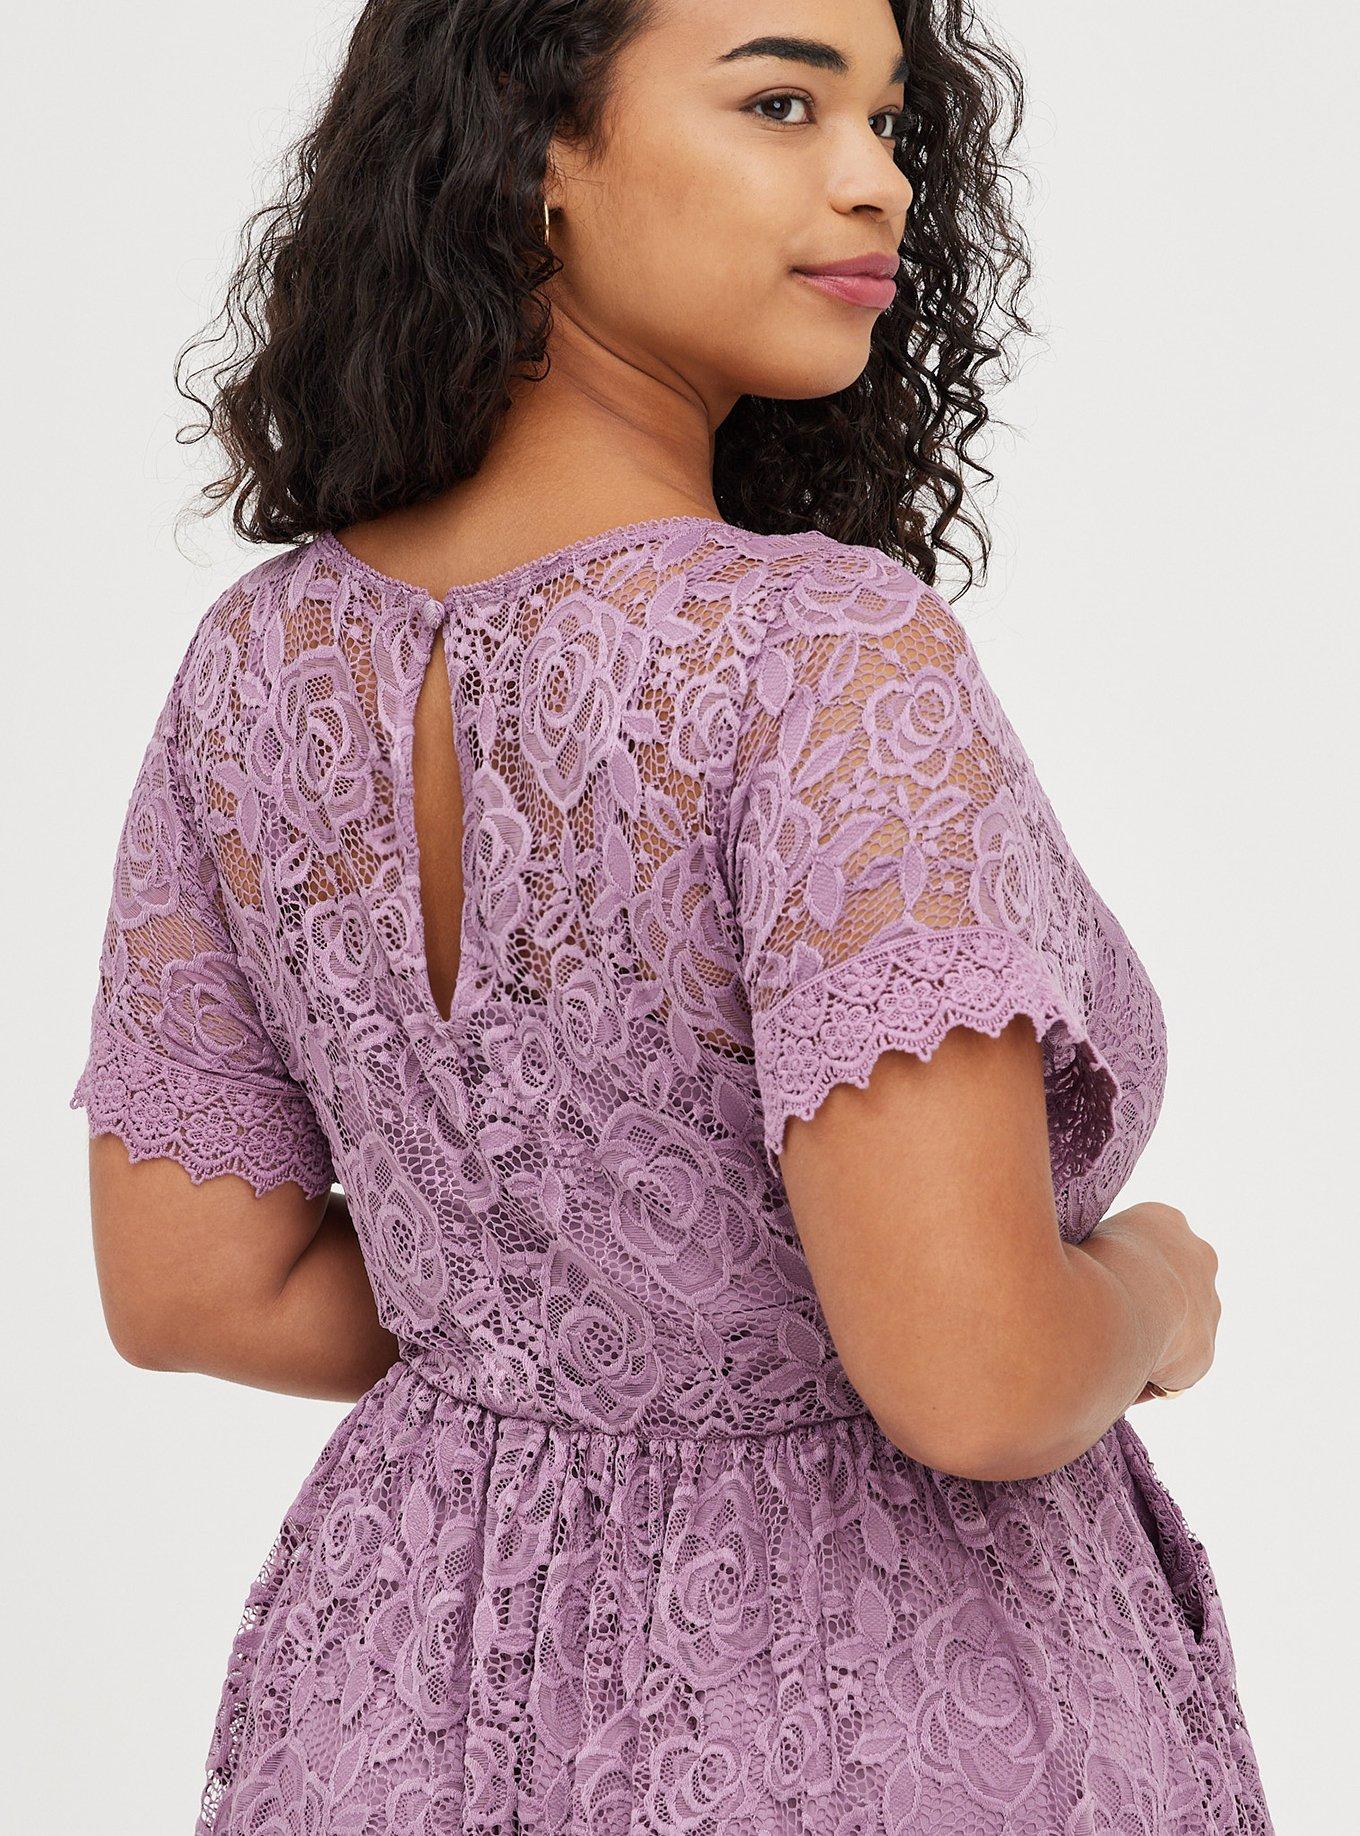 Torrid Mini Gauze Lace-Up Skater Dress Size 3X - $41 - From Candice